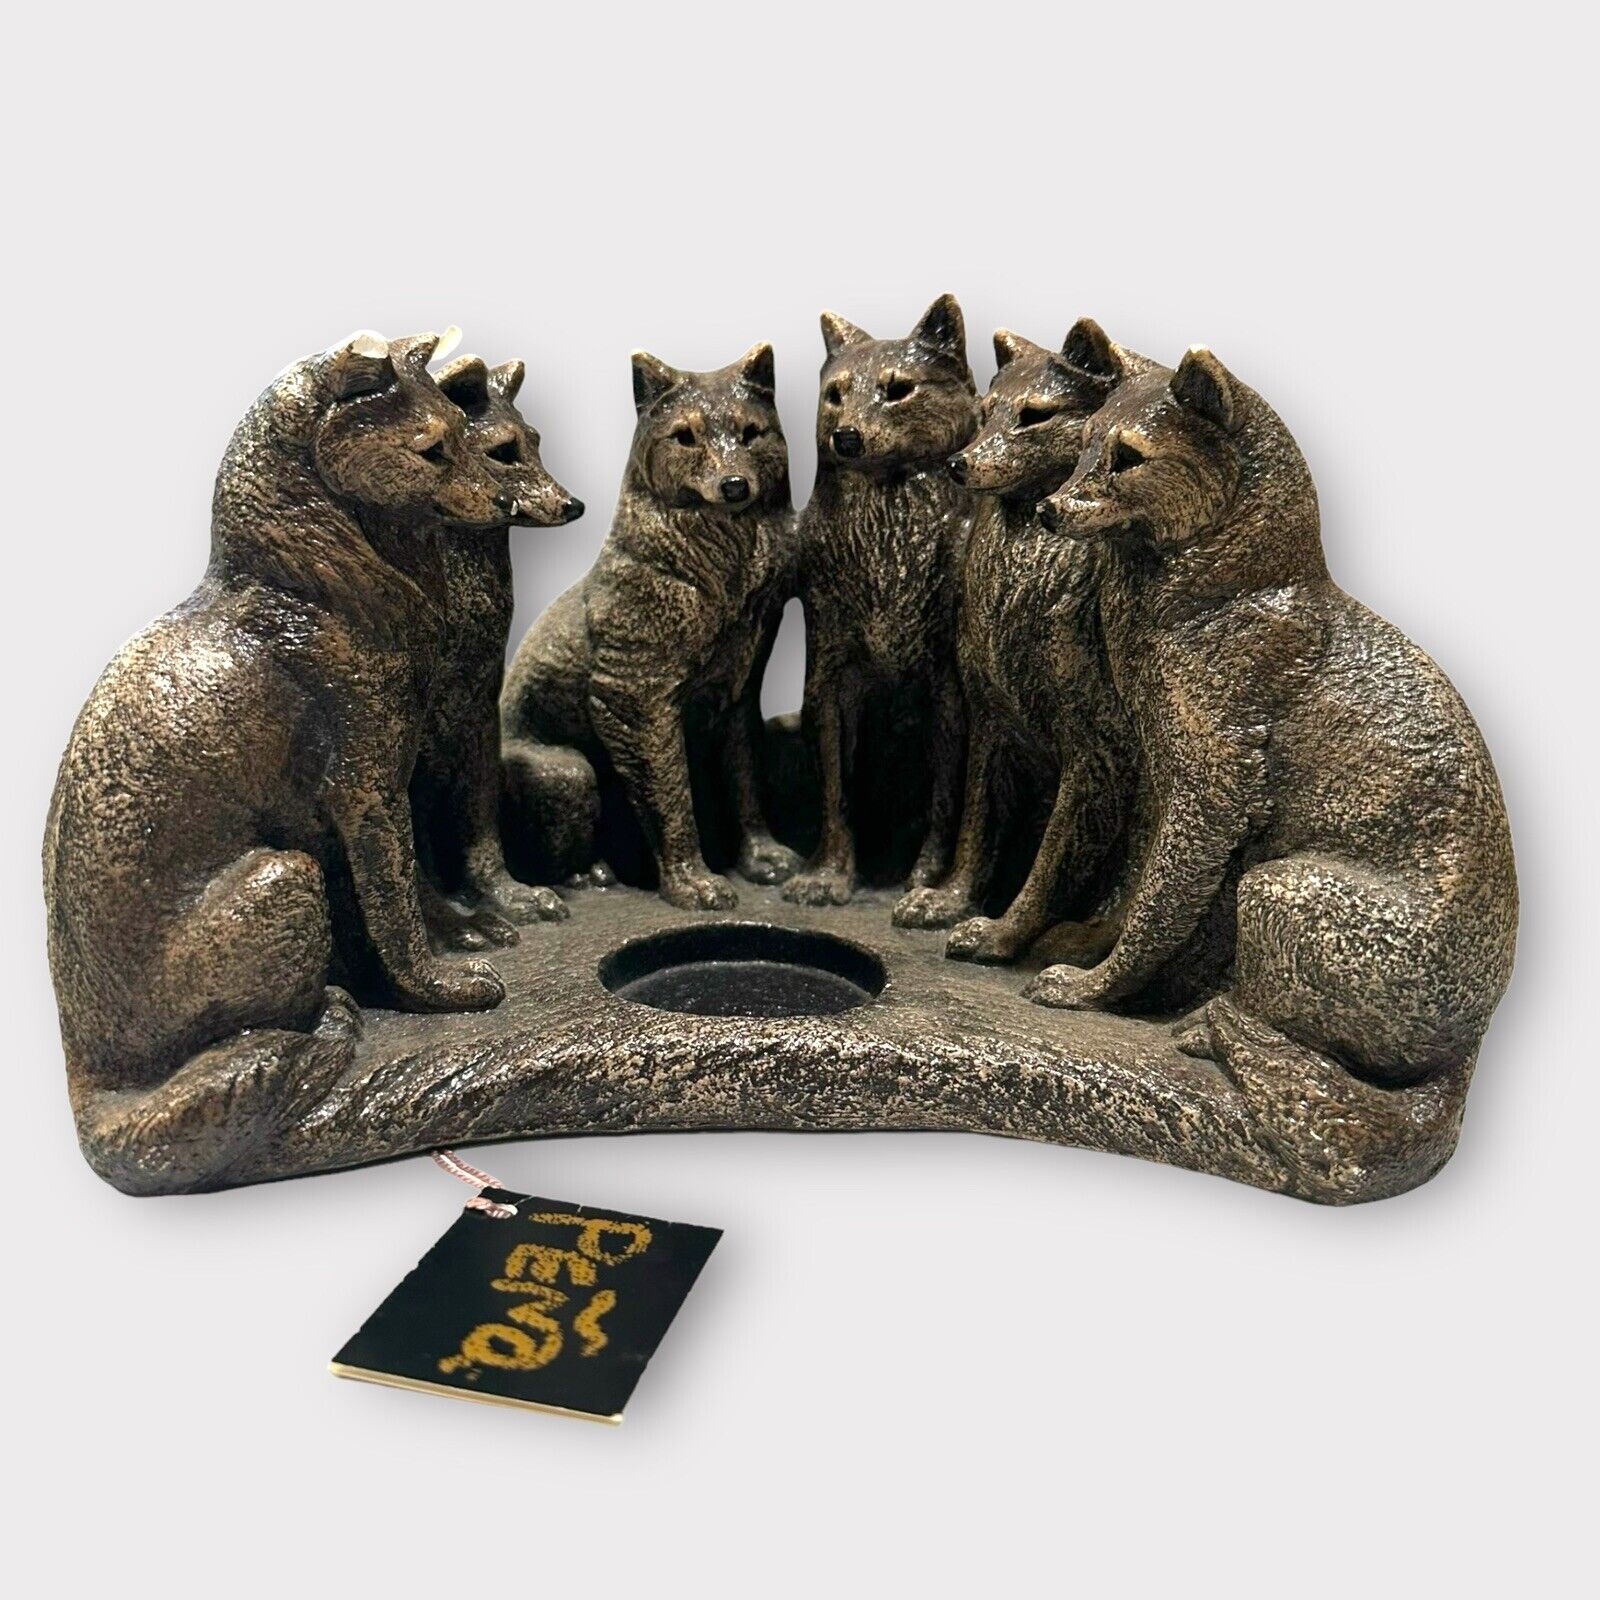 Windstone Editions WOLF PACK COUNCIL Wolves Candle Sculpture Pena 2001 Shadows